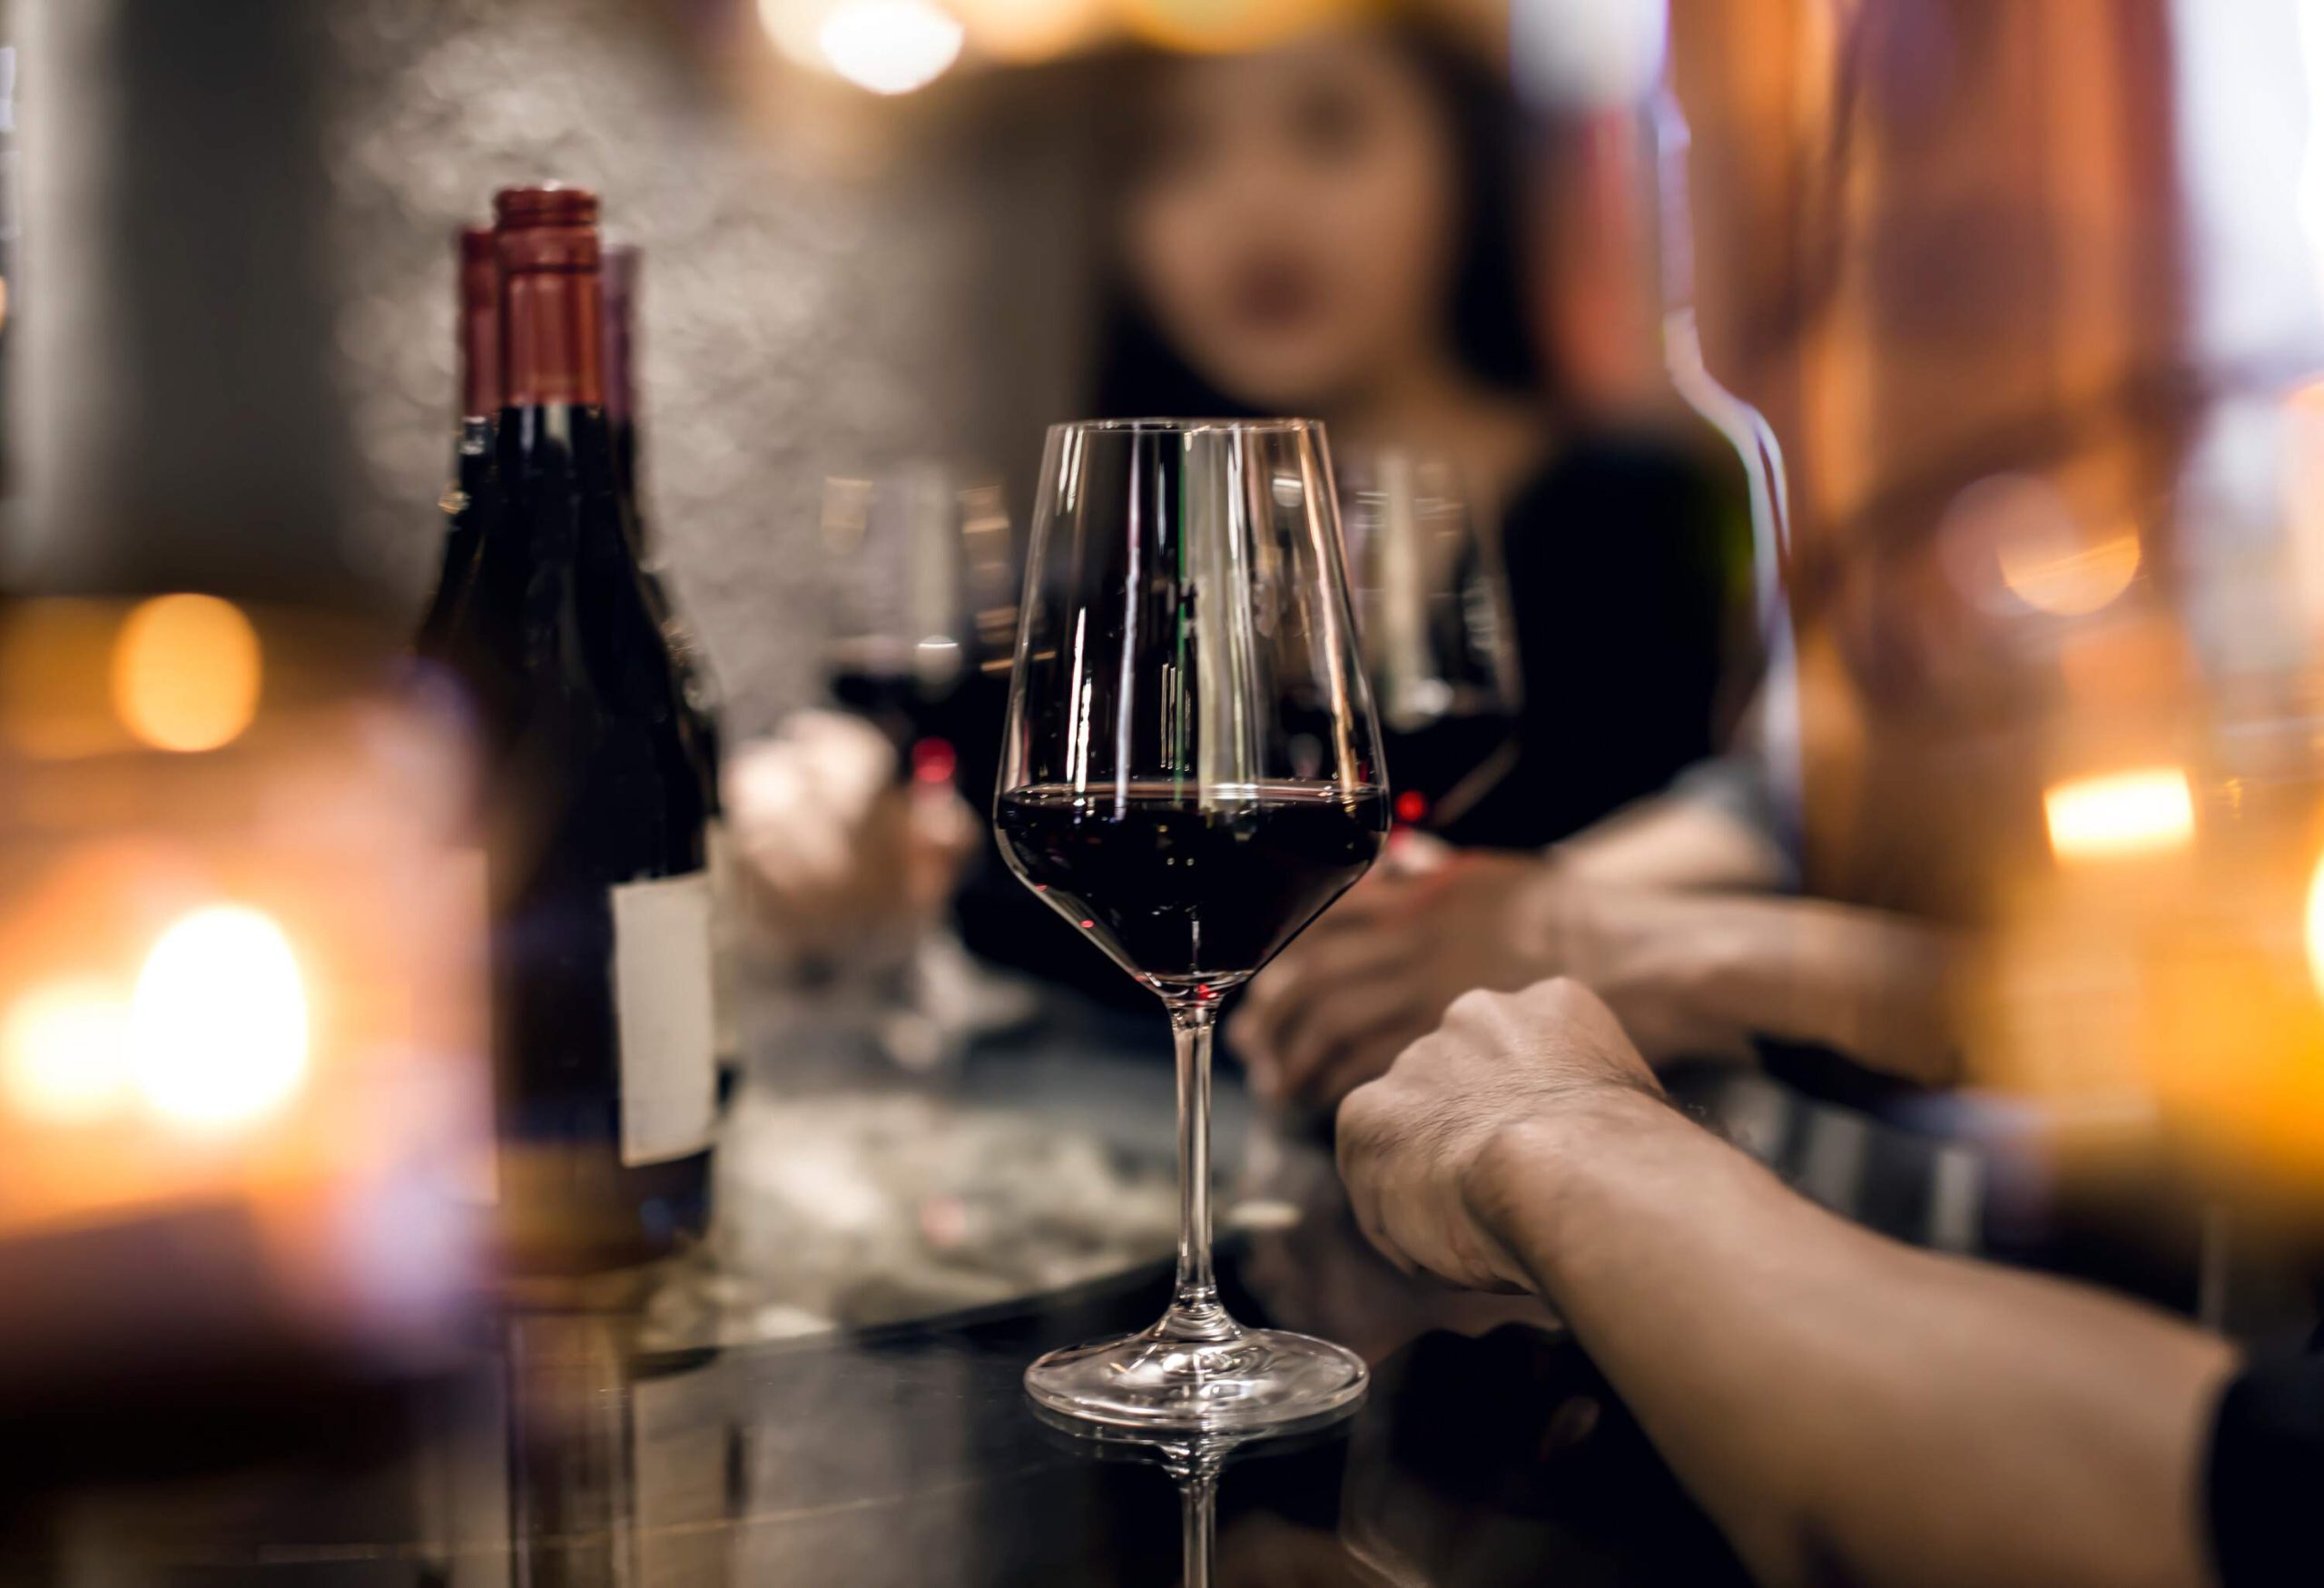 A red wine glass is placed on a table, surrounded by a group of friends in the background, creating a blurred effect.